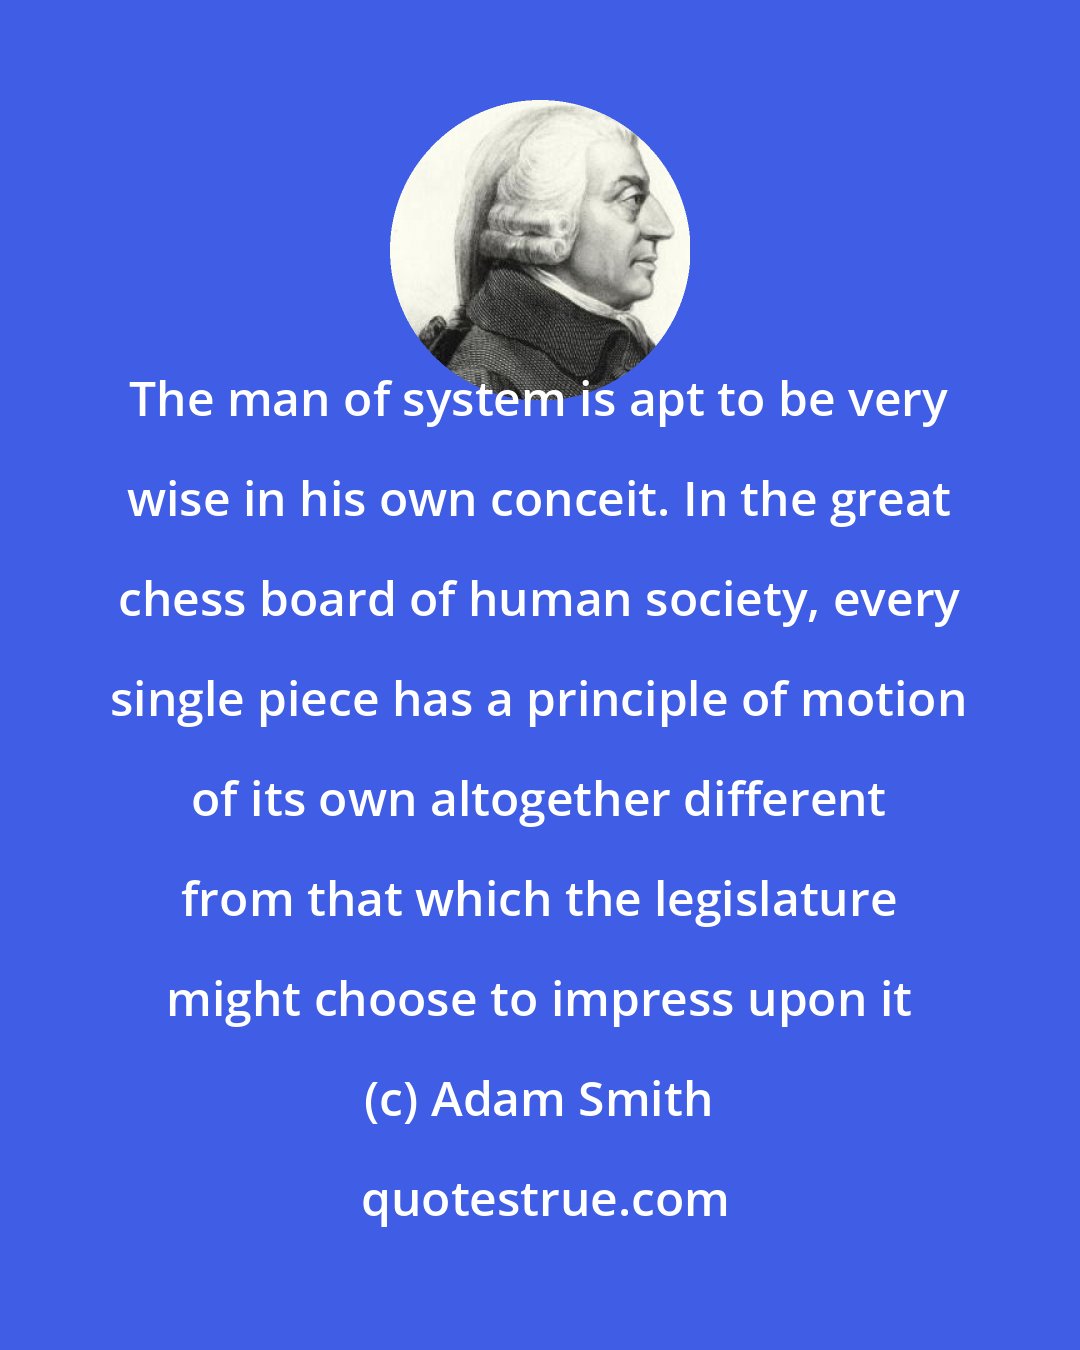 Adam Smith: The man of system is apt to be very wise in his own conceit. In the great chess board of human society, every single piece has a principle of motion of its own altogether different from that which the legislature might choose to impress upon it